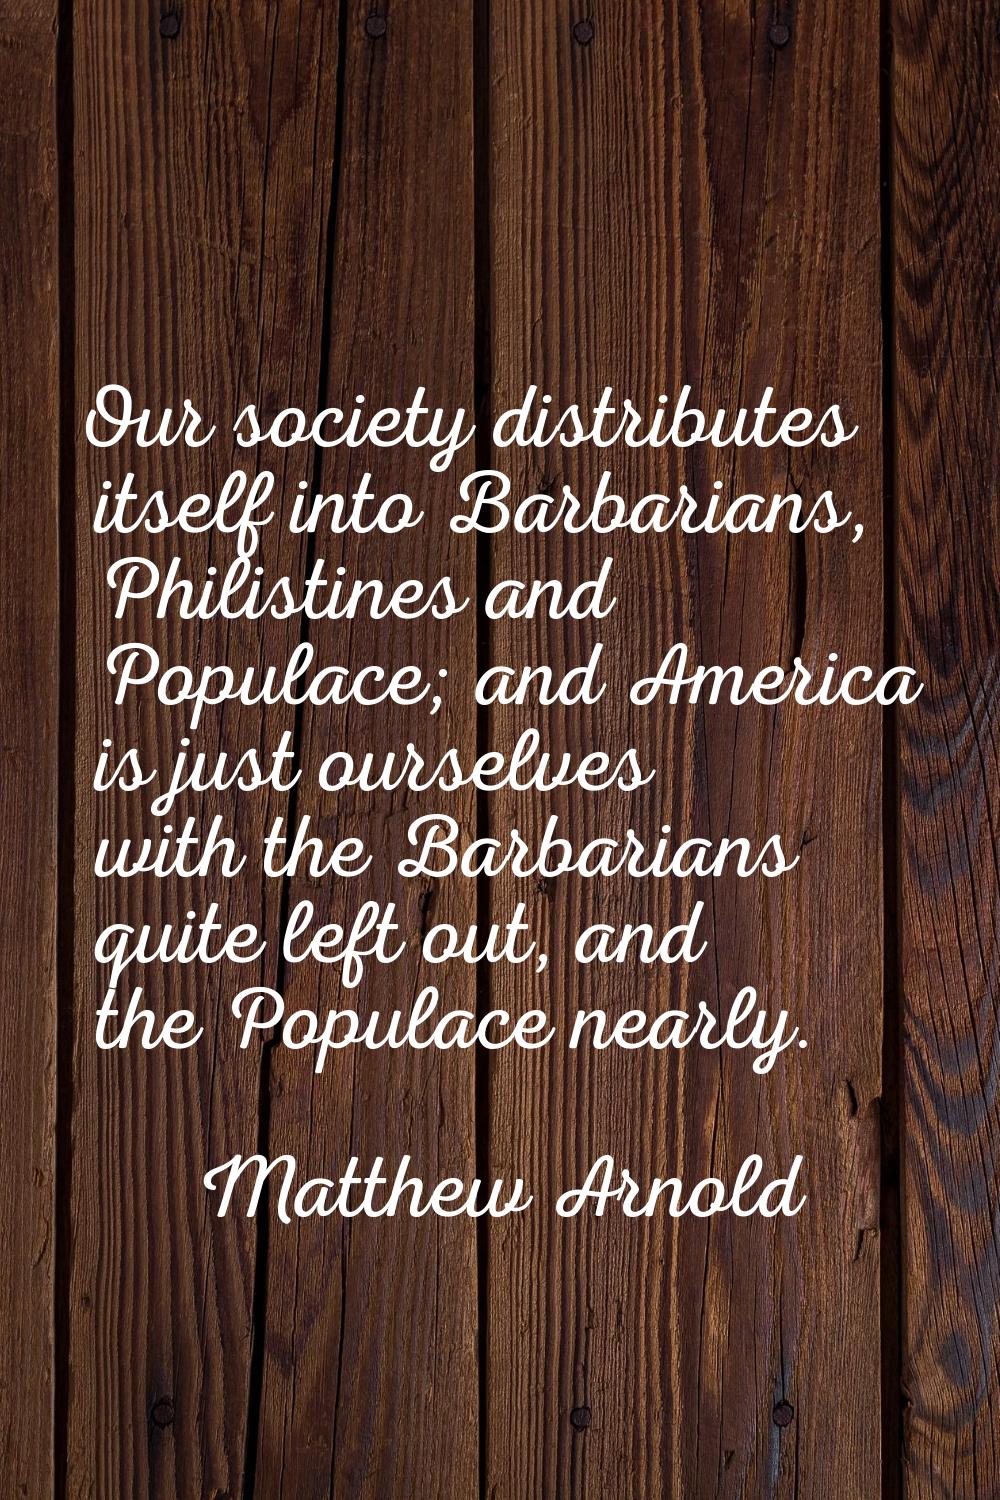 Our society distributes itself into Barbarians, Philistines and Populace; and America is just ourse